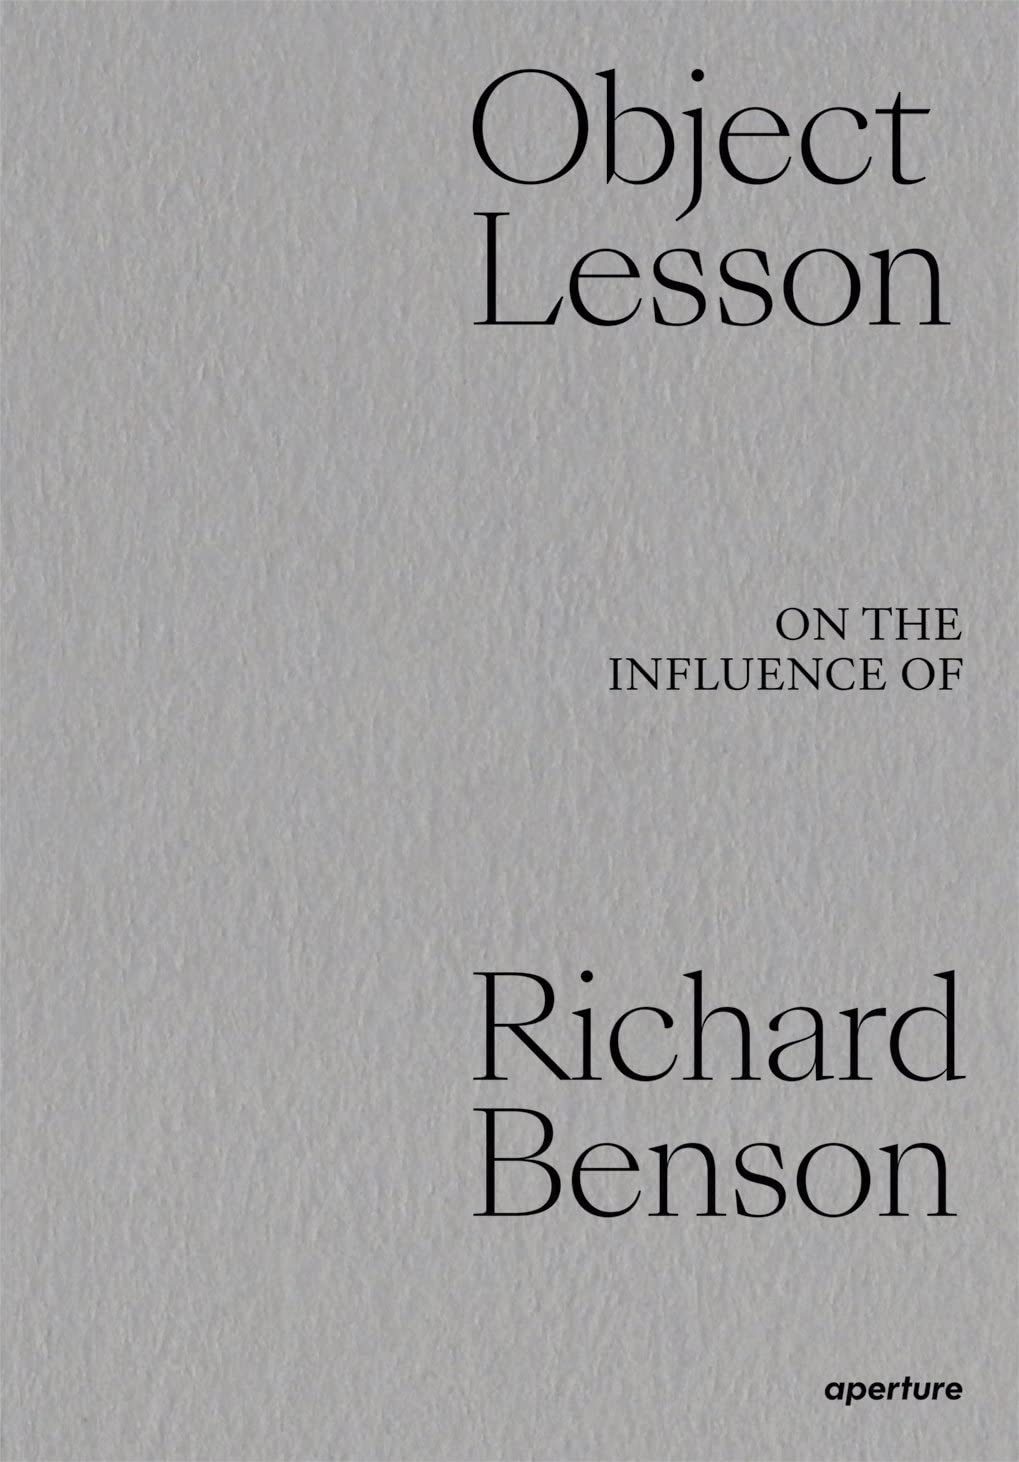 Object Lesson: On the Influence of Richard Benson images from the bible old testament